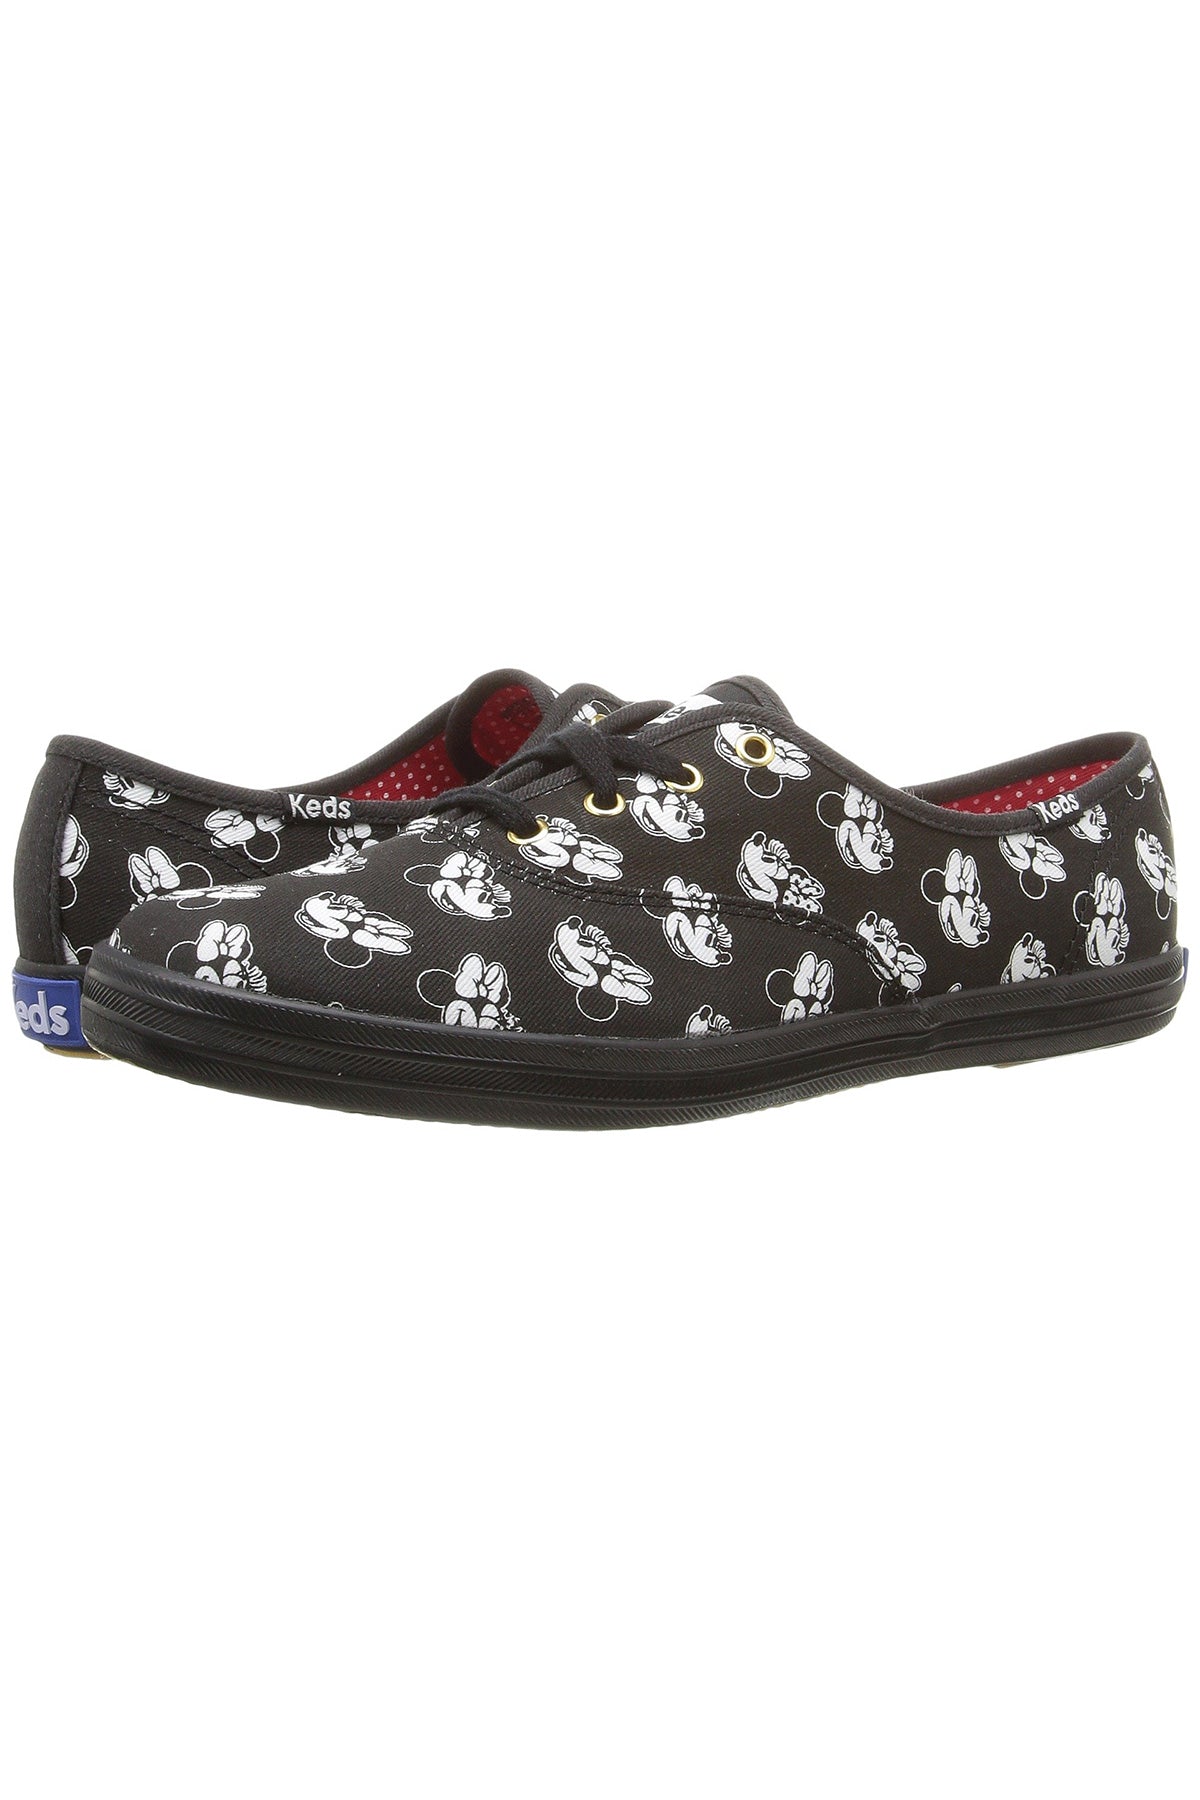 Keds Minnie Mouse Print Low Sneaker 